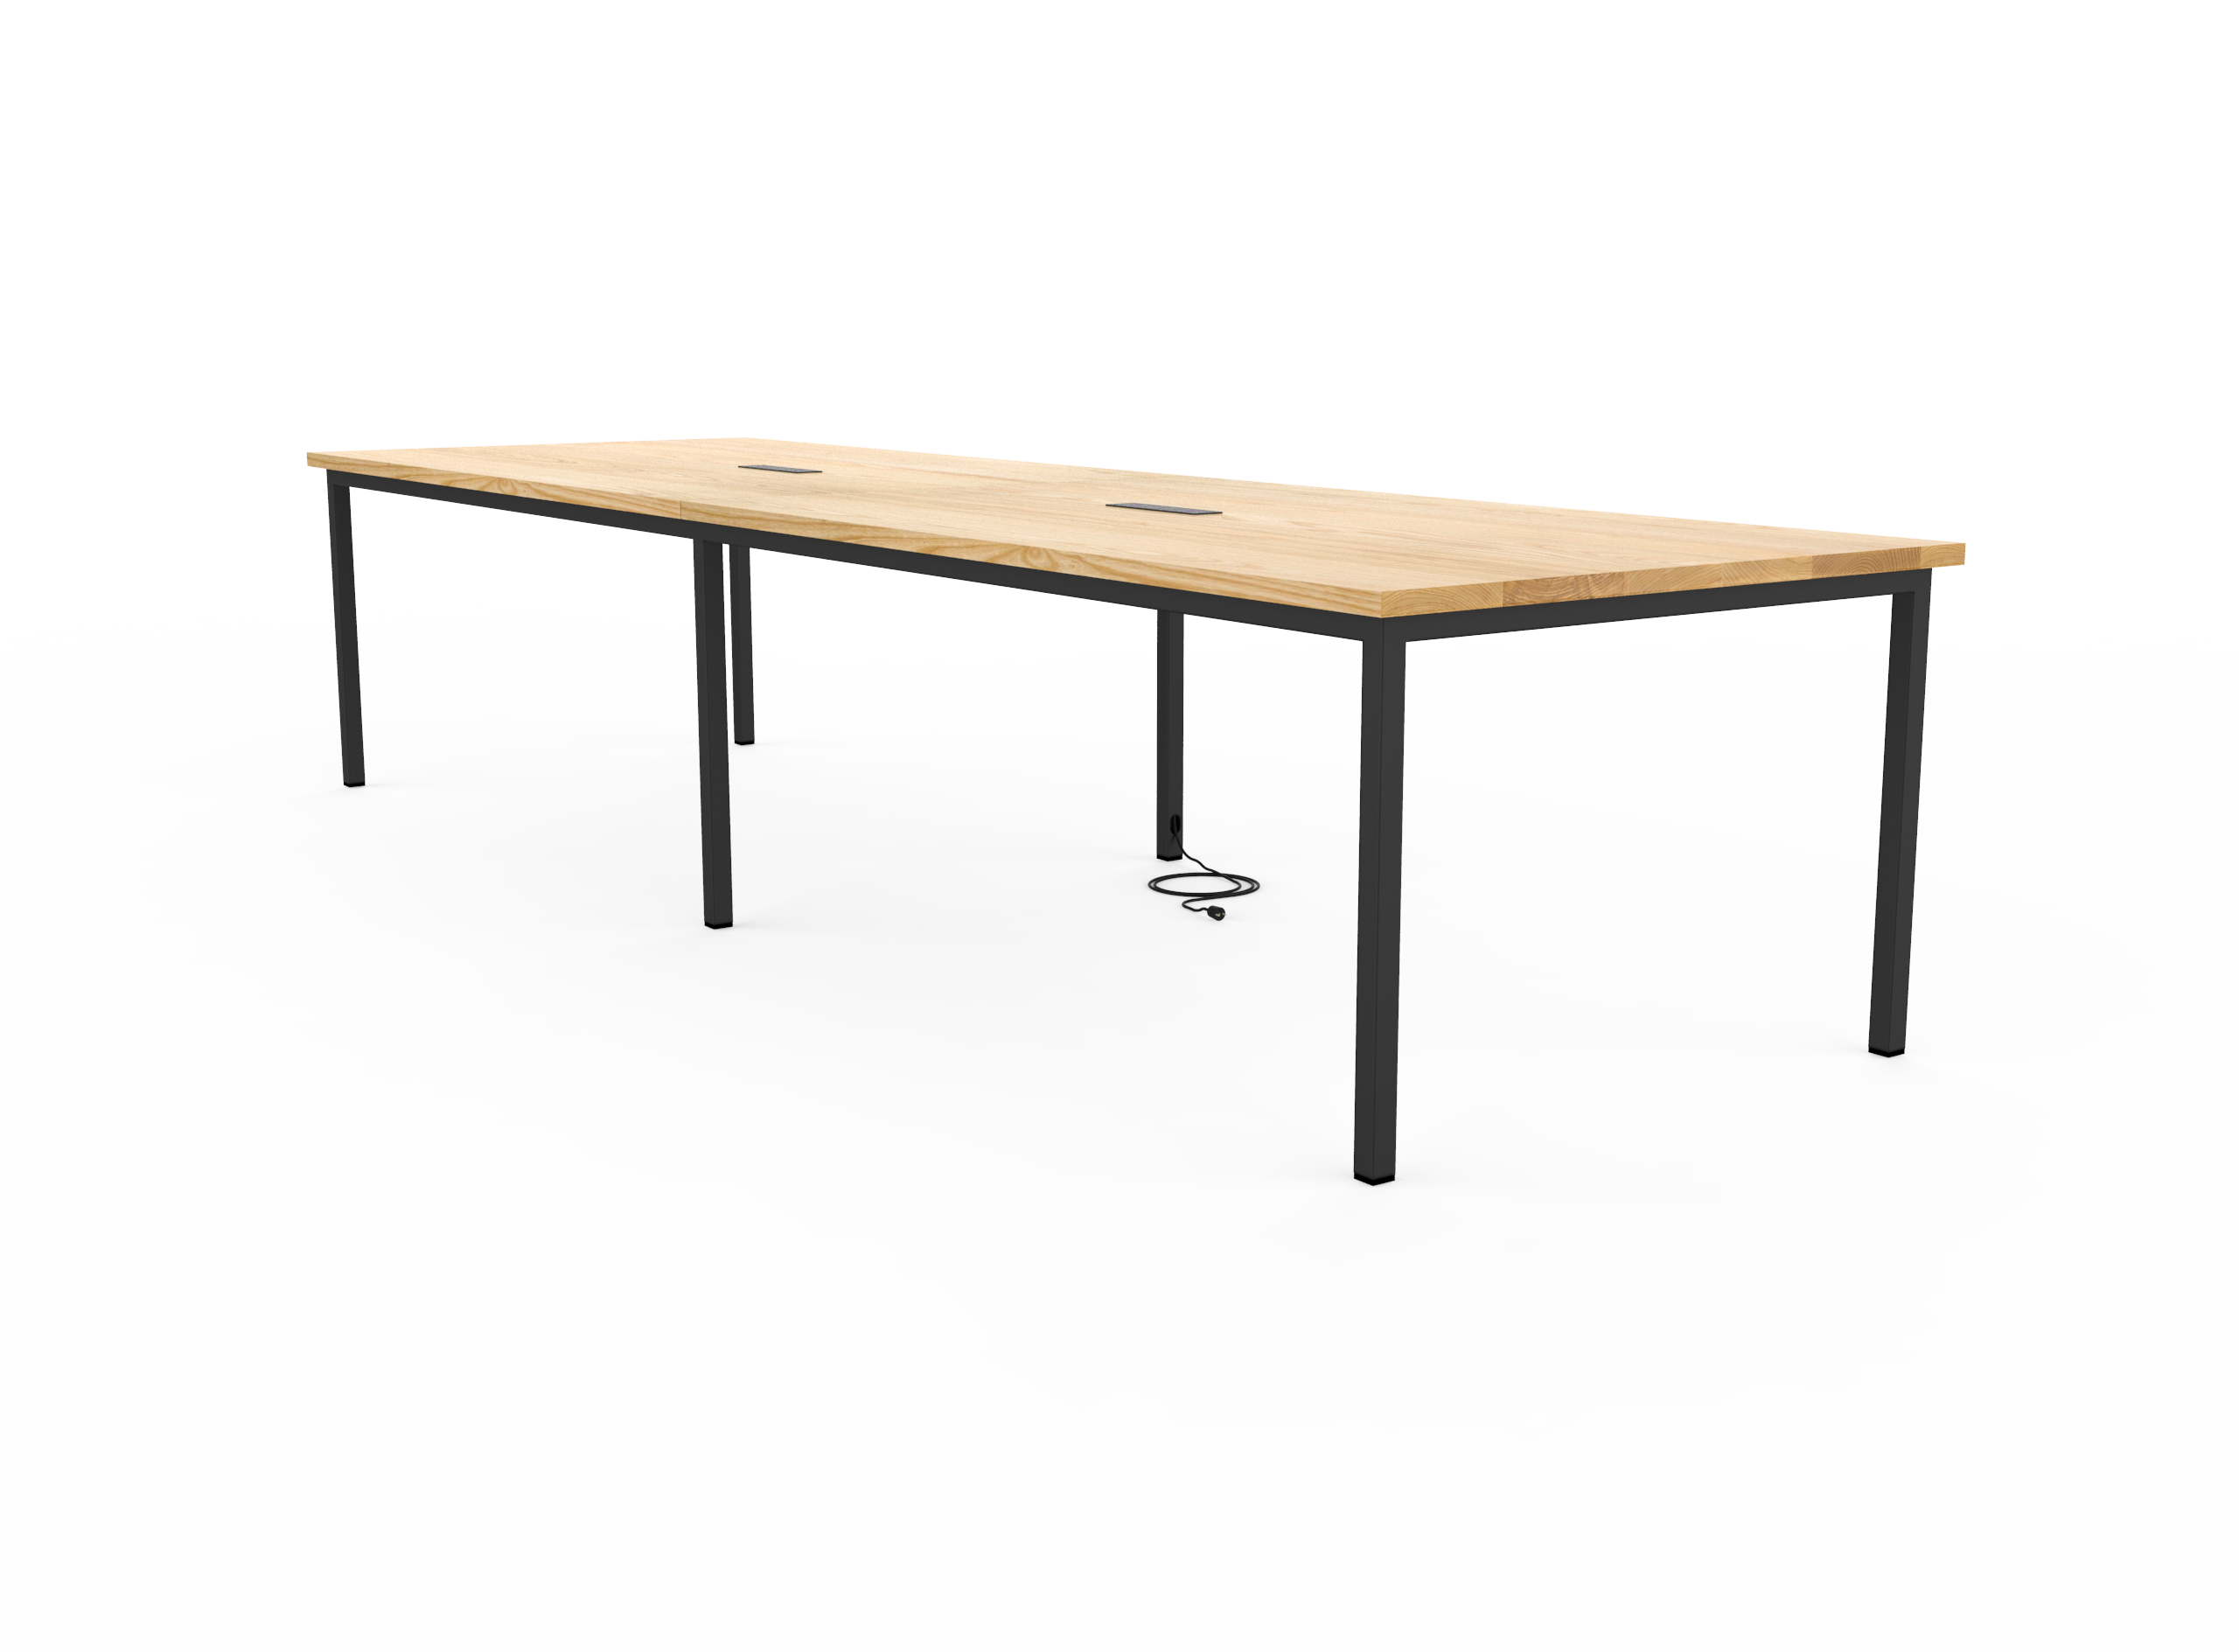 Vermont Farm Table Custom Wood Conference S150 003 Ash 